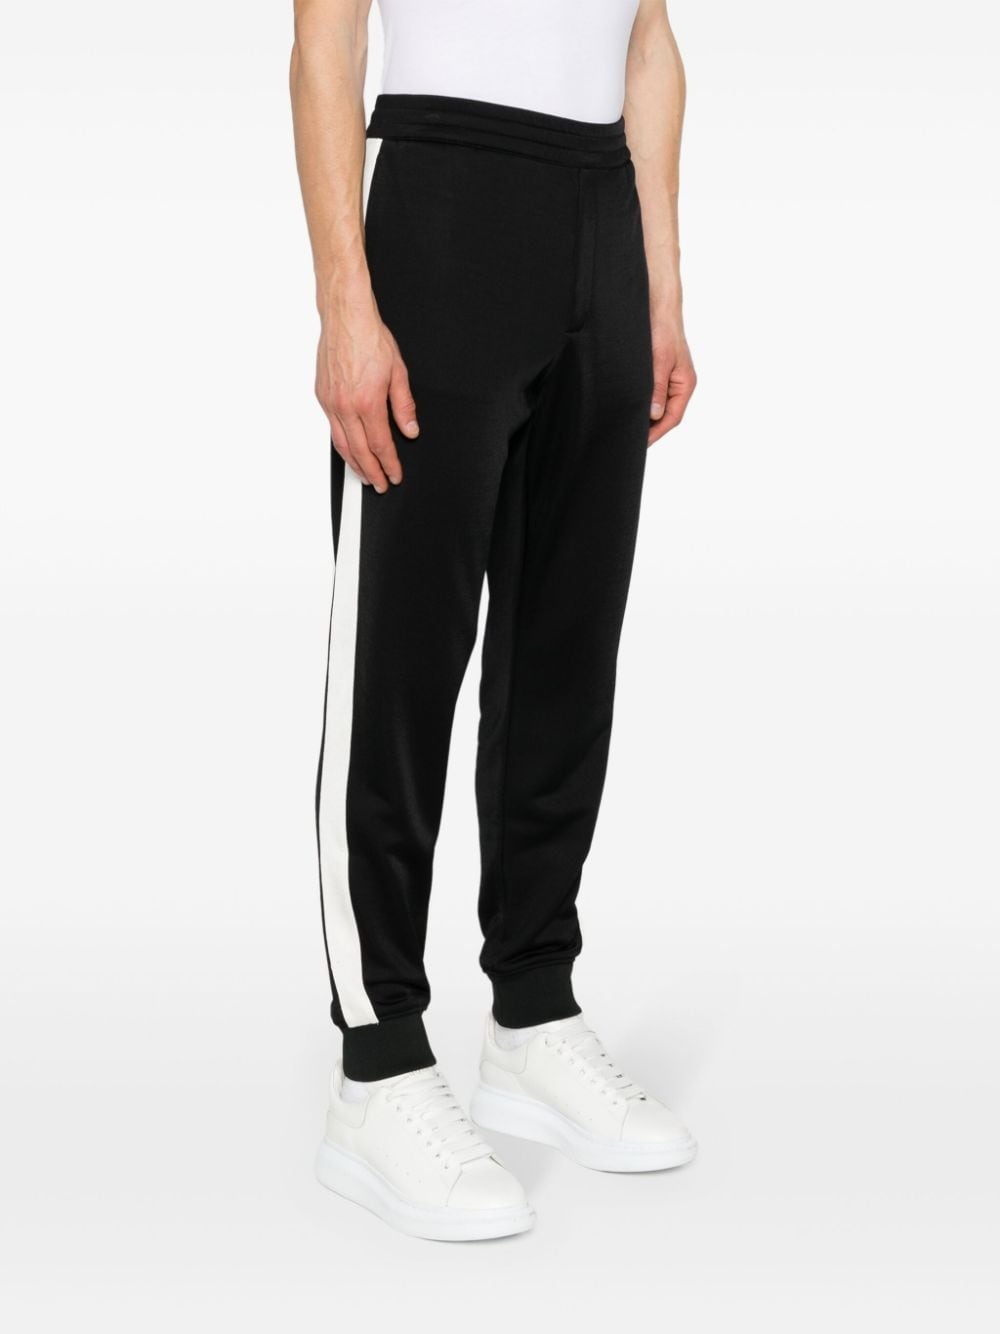 embroidered-logo contrast-panel track pants - 3